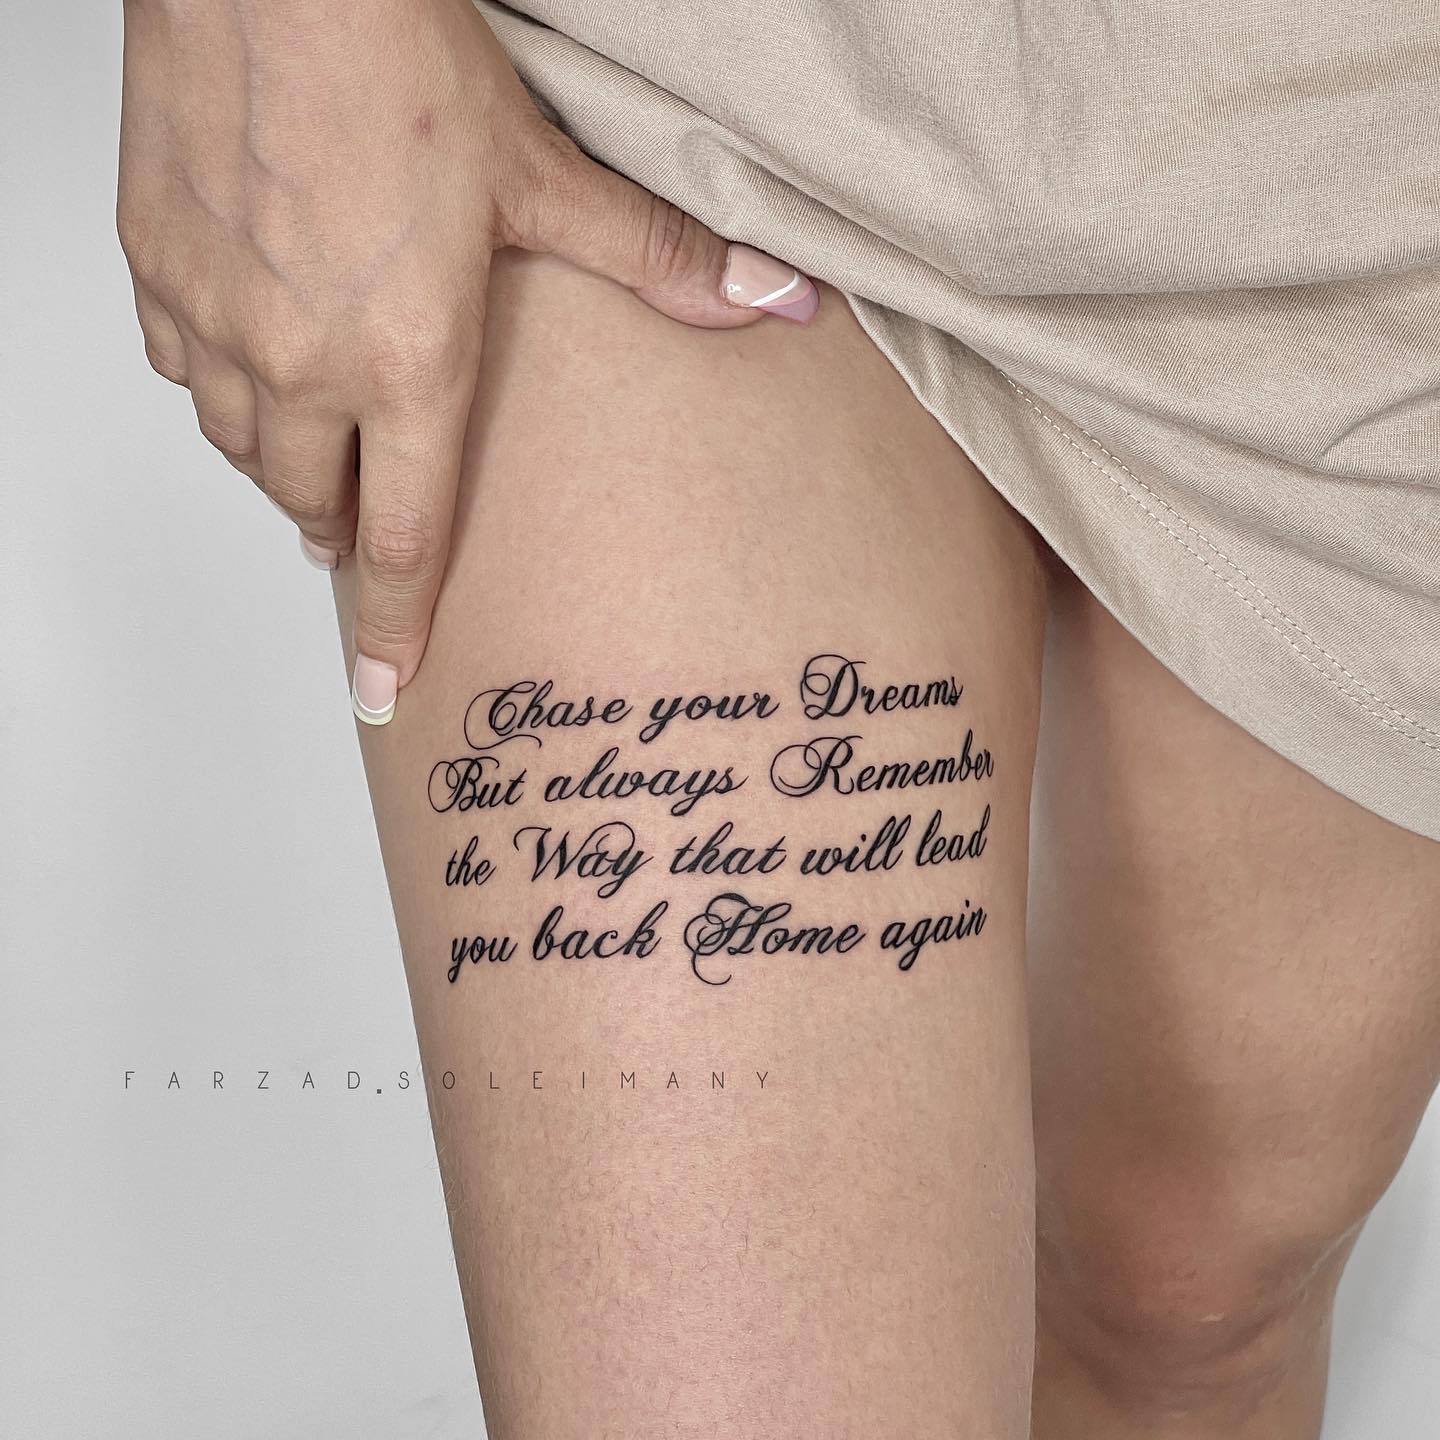 Perplexing Quote Family Tattoos  Quote Family Tattoos  Family Tattoos   MomCanvas